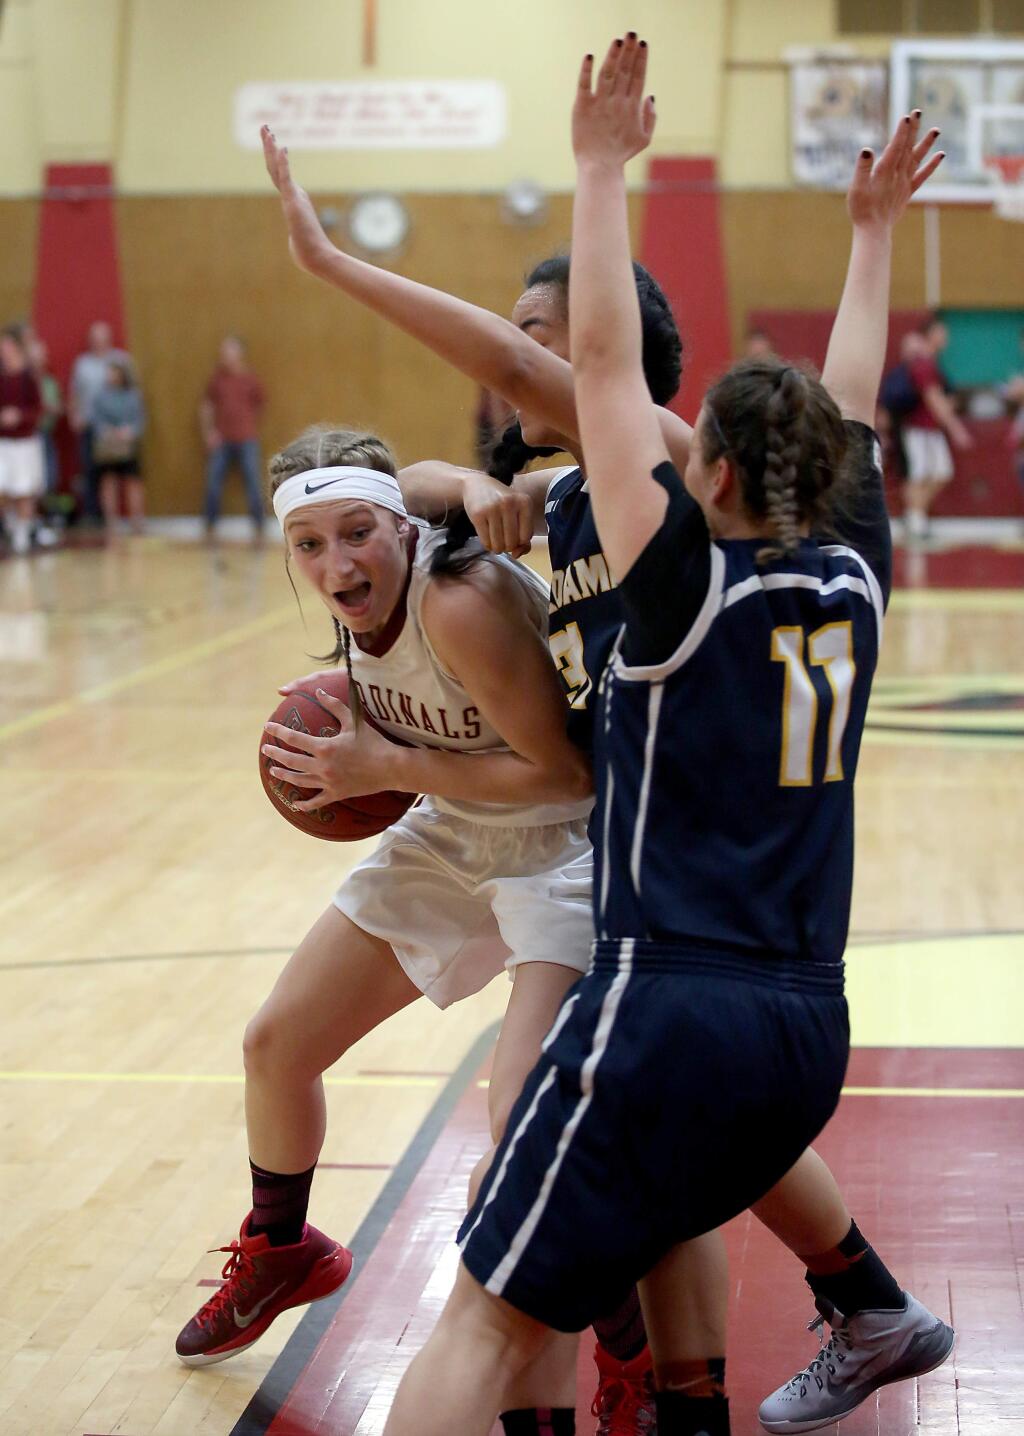 Cardinal Newman's Tiffany Salinas tries to push past Notre Dame's Limu Vanisi, center, and Eleni Giotinis, right during the game held at Cardinal Newman High School, Saturday, March 14, 2015. (CRISTA JEREMIASON / The Press Democrat)